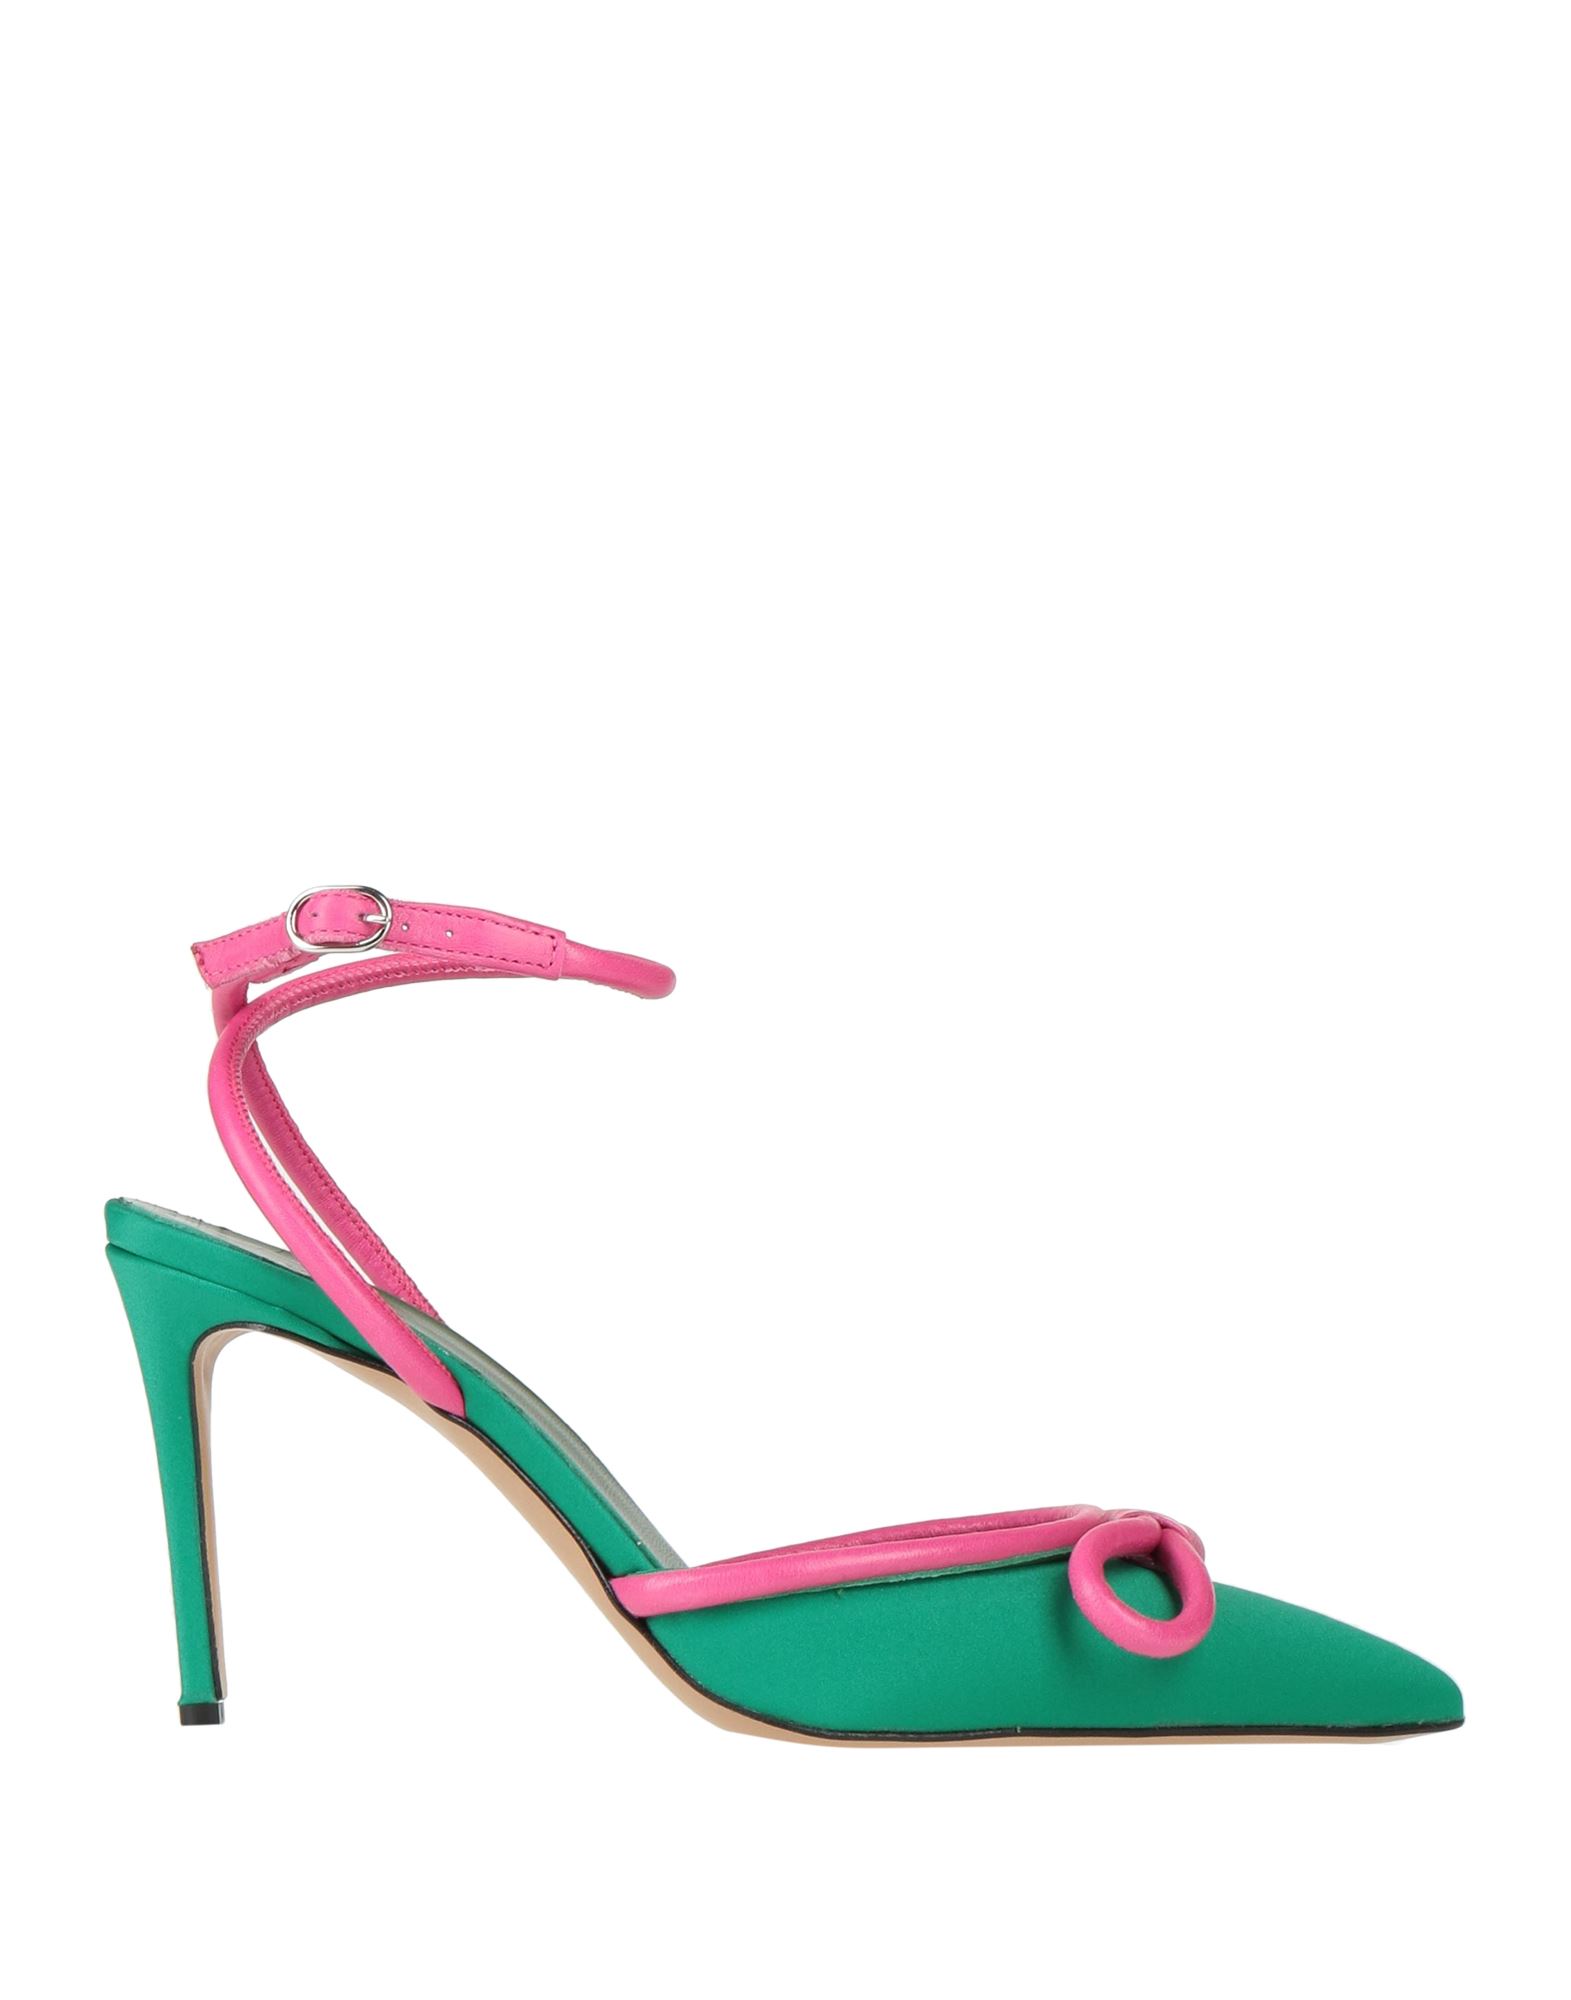 Ovye' By Cristina Lucchi Pumps In Green